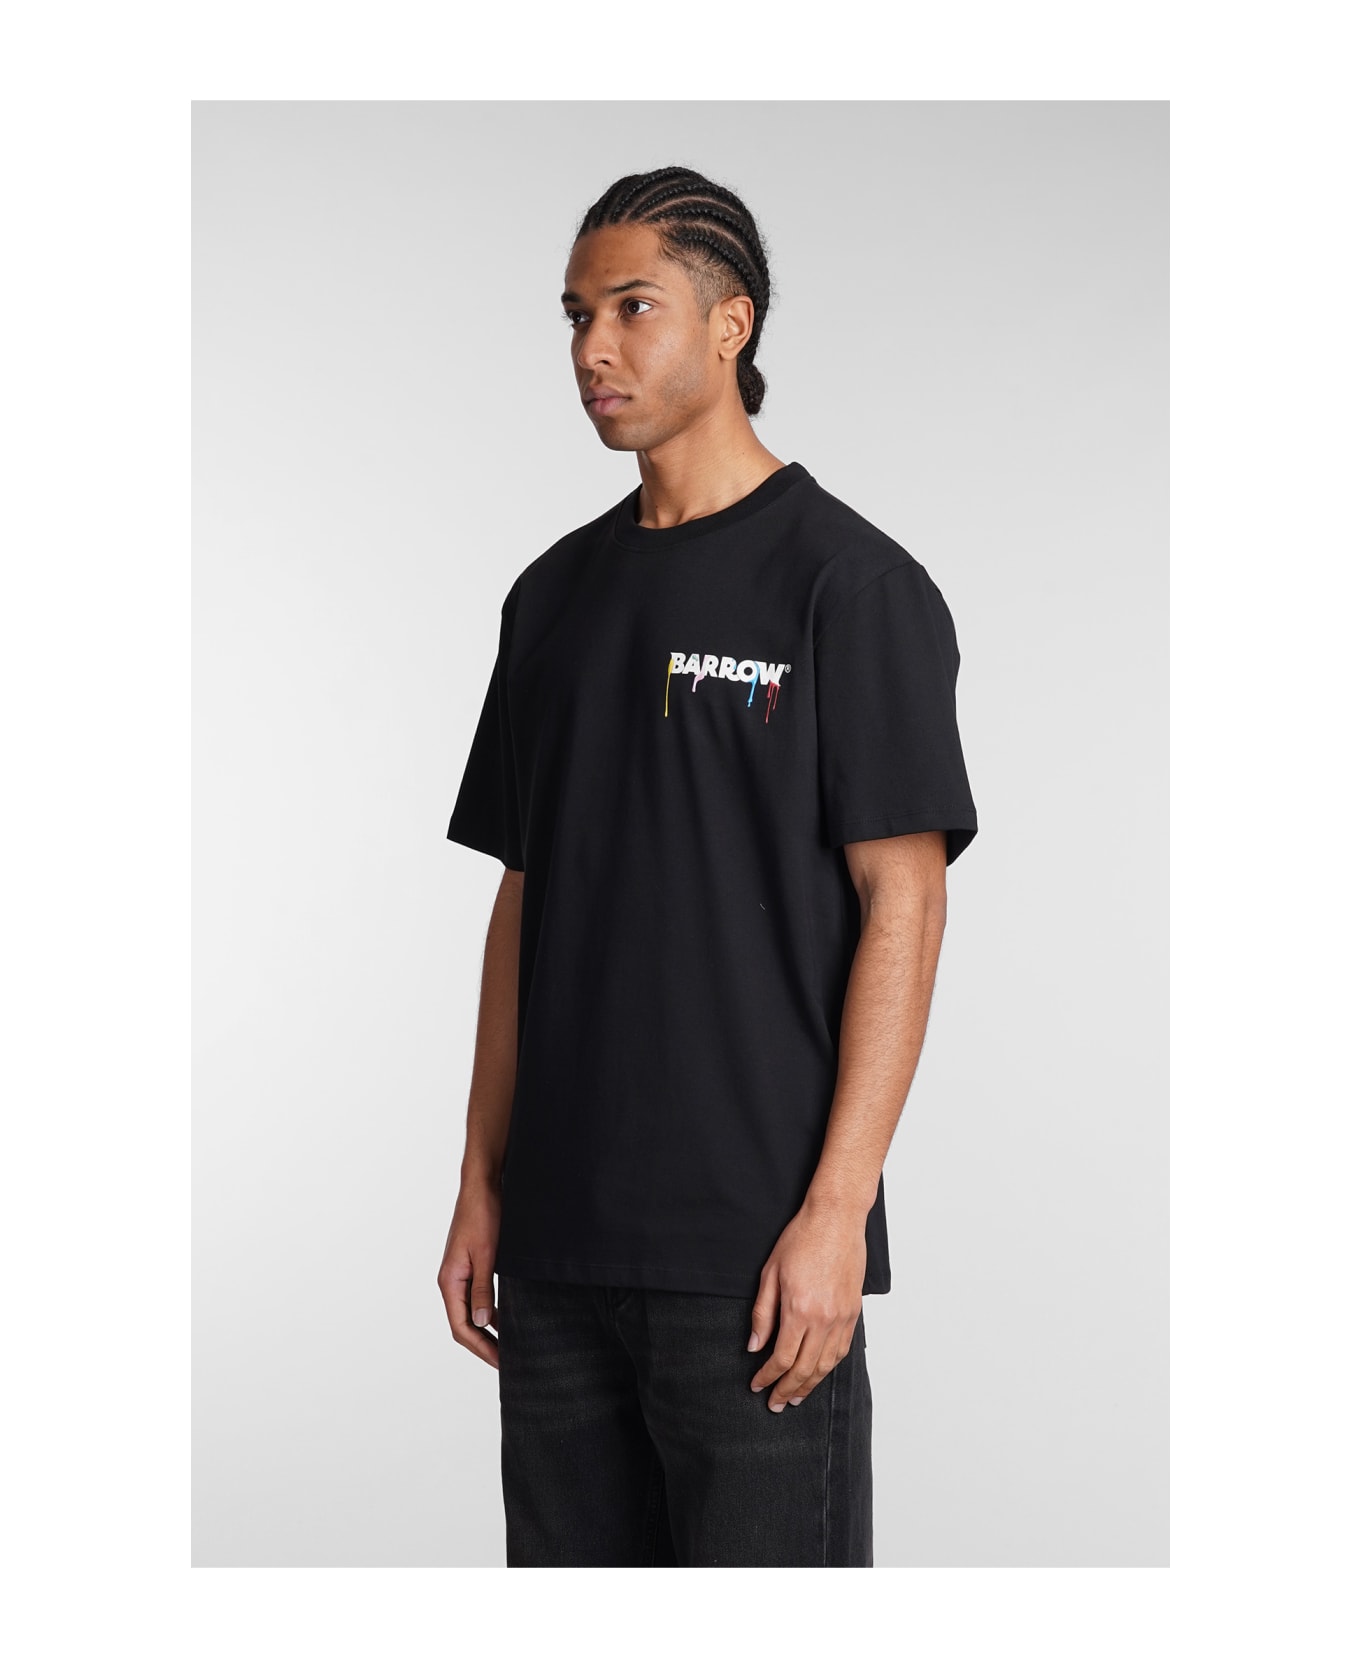 Barrow Black T-shirt With Logo And Colour Spots - Black